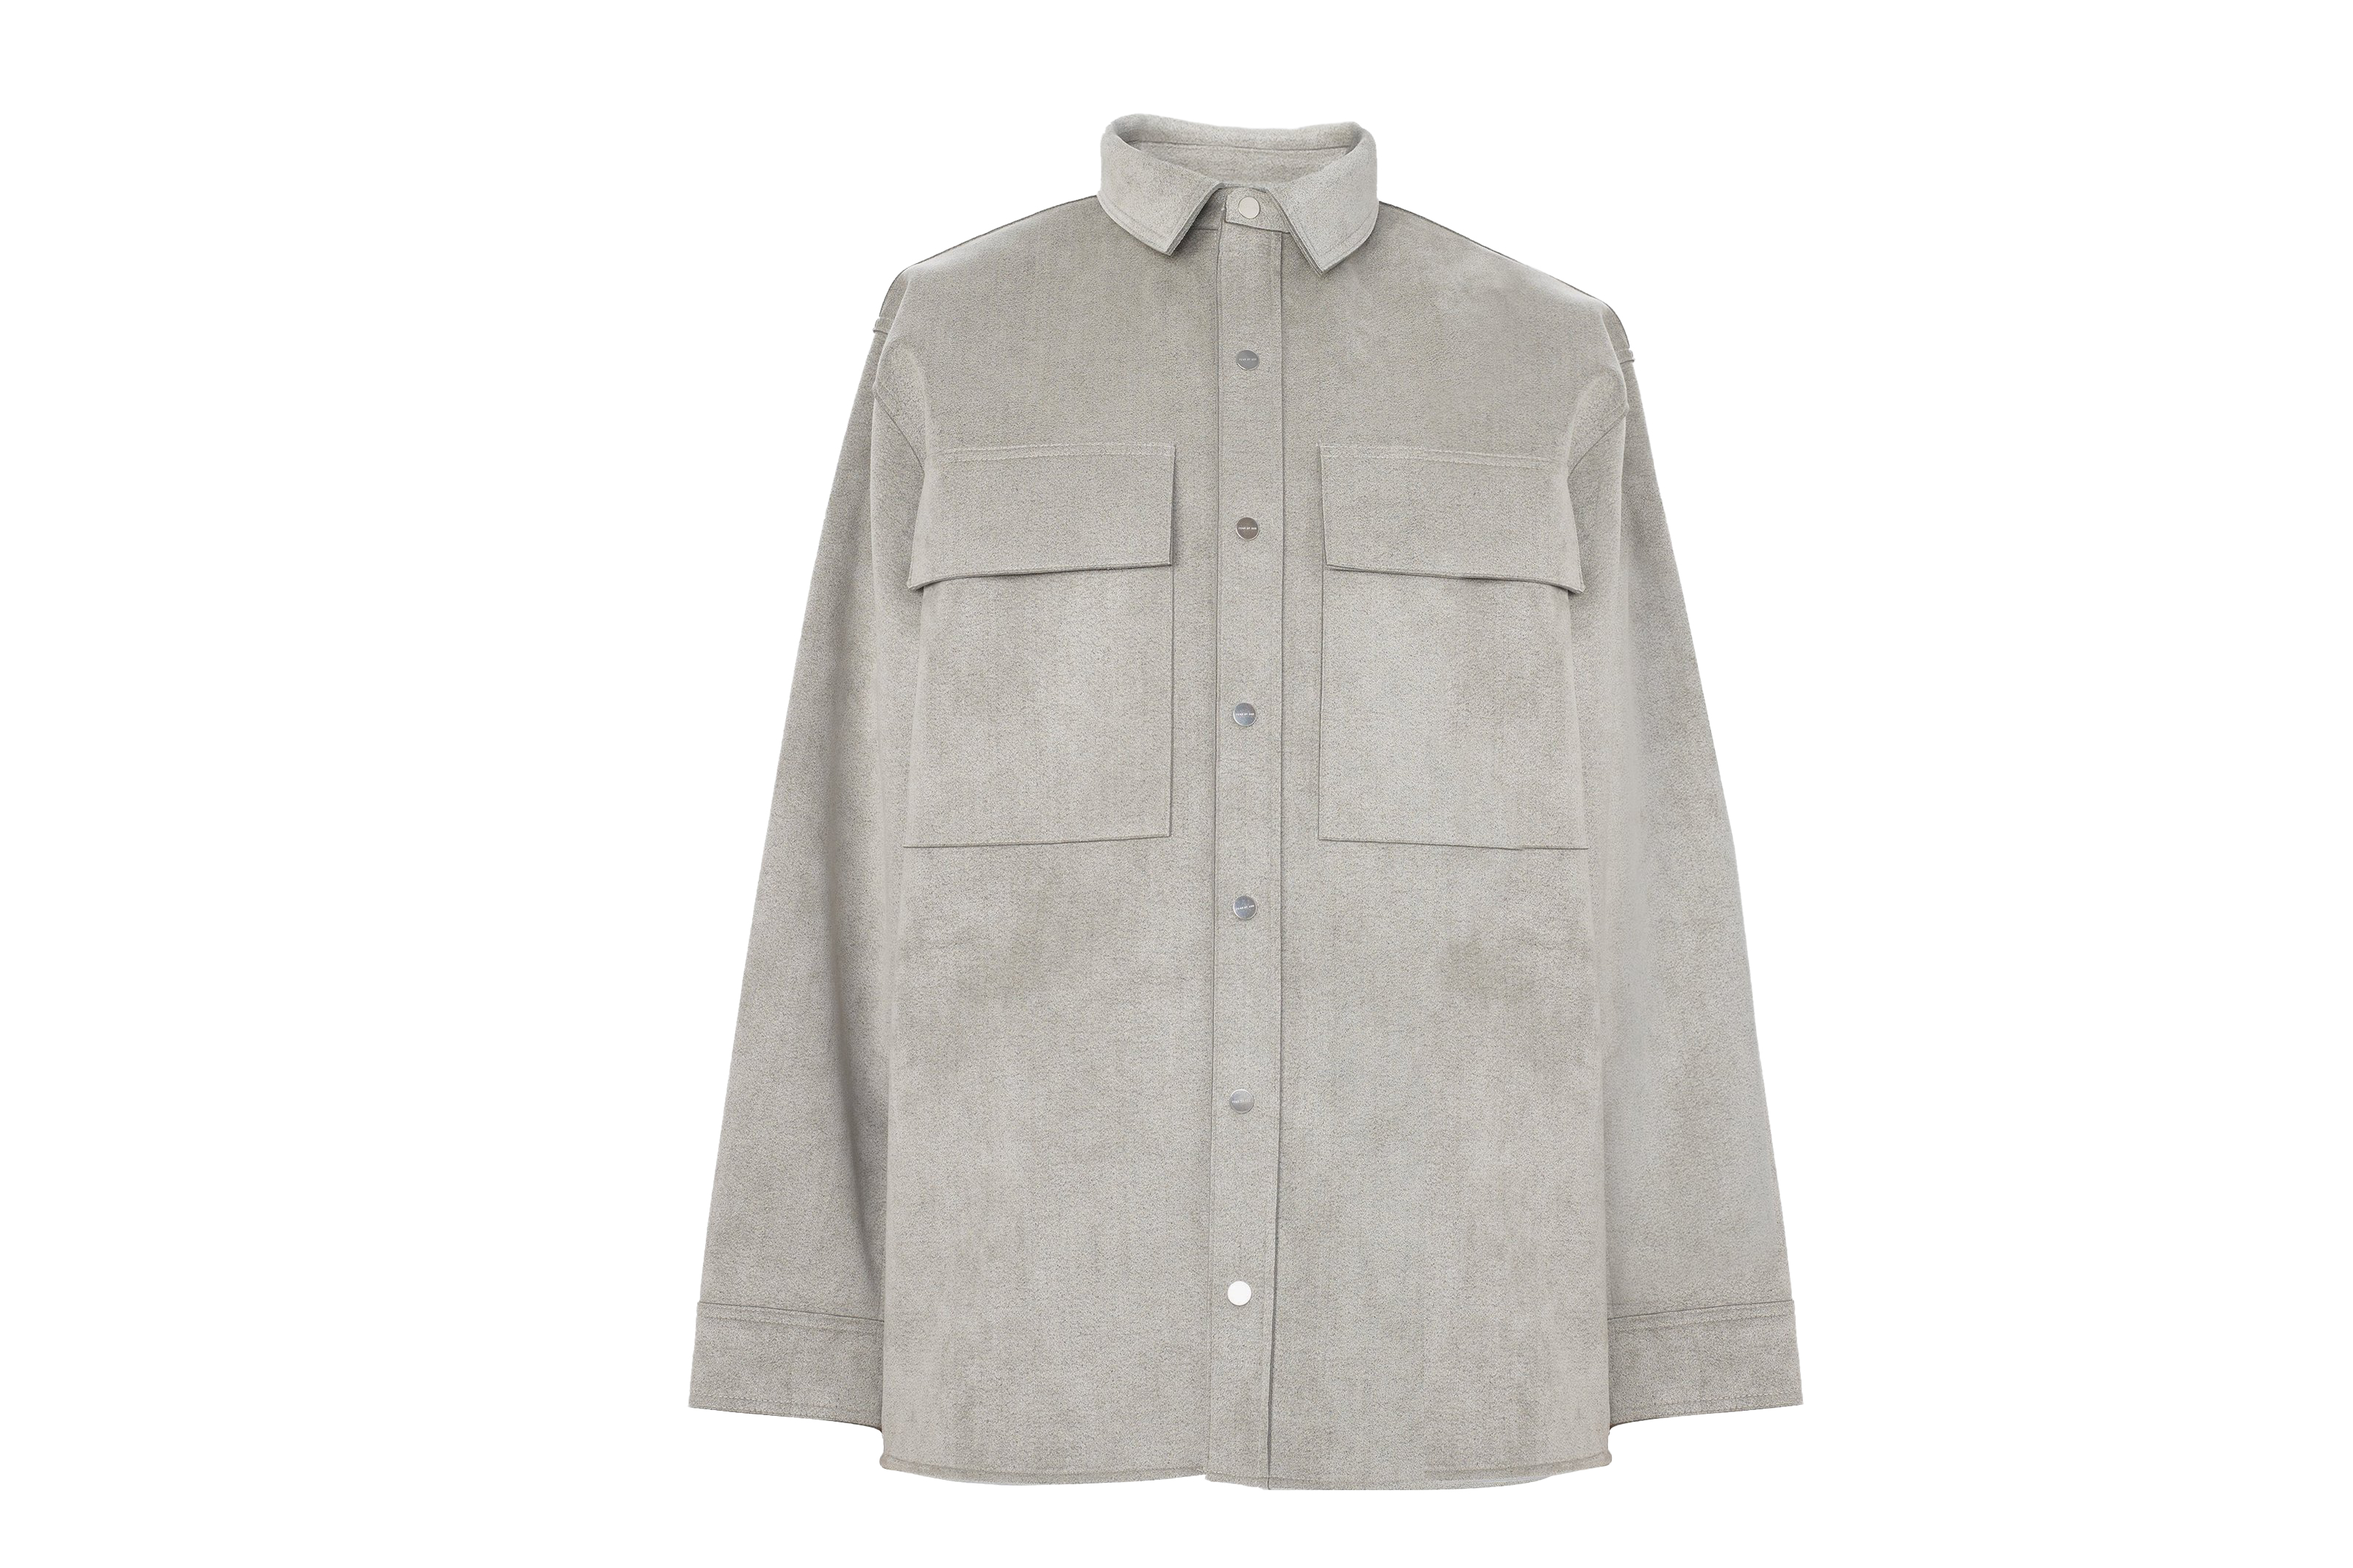 FEAR OF GOD 6th Ultra Suede Shirt Jacket